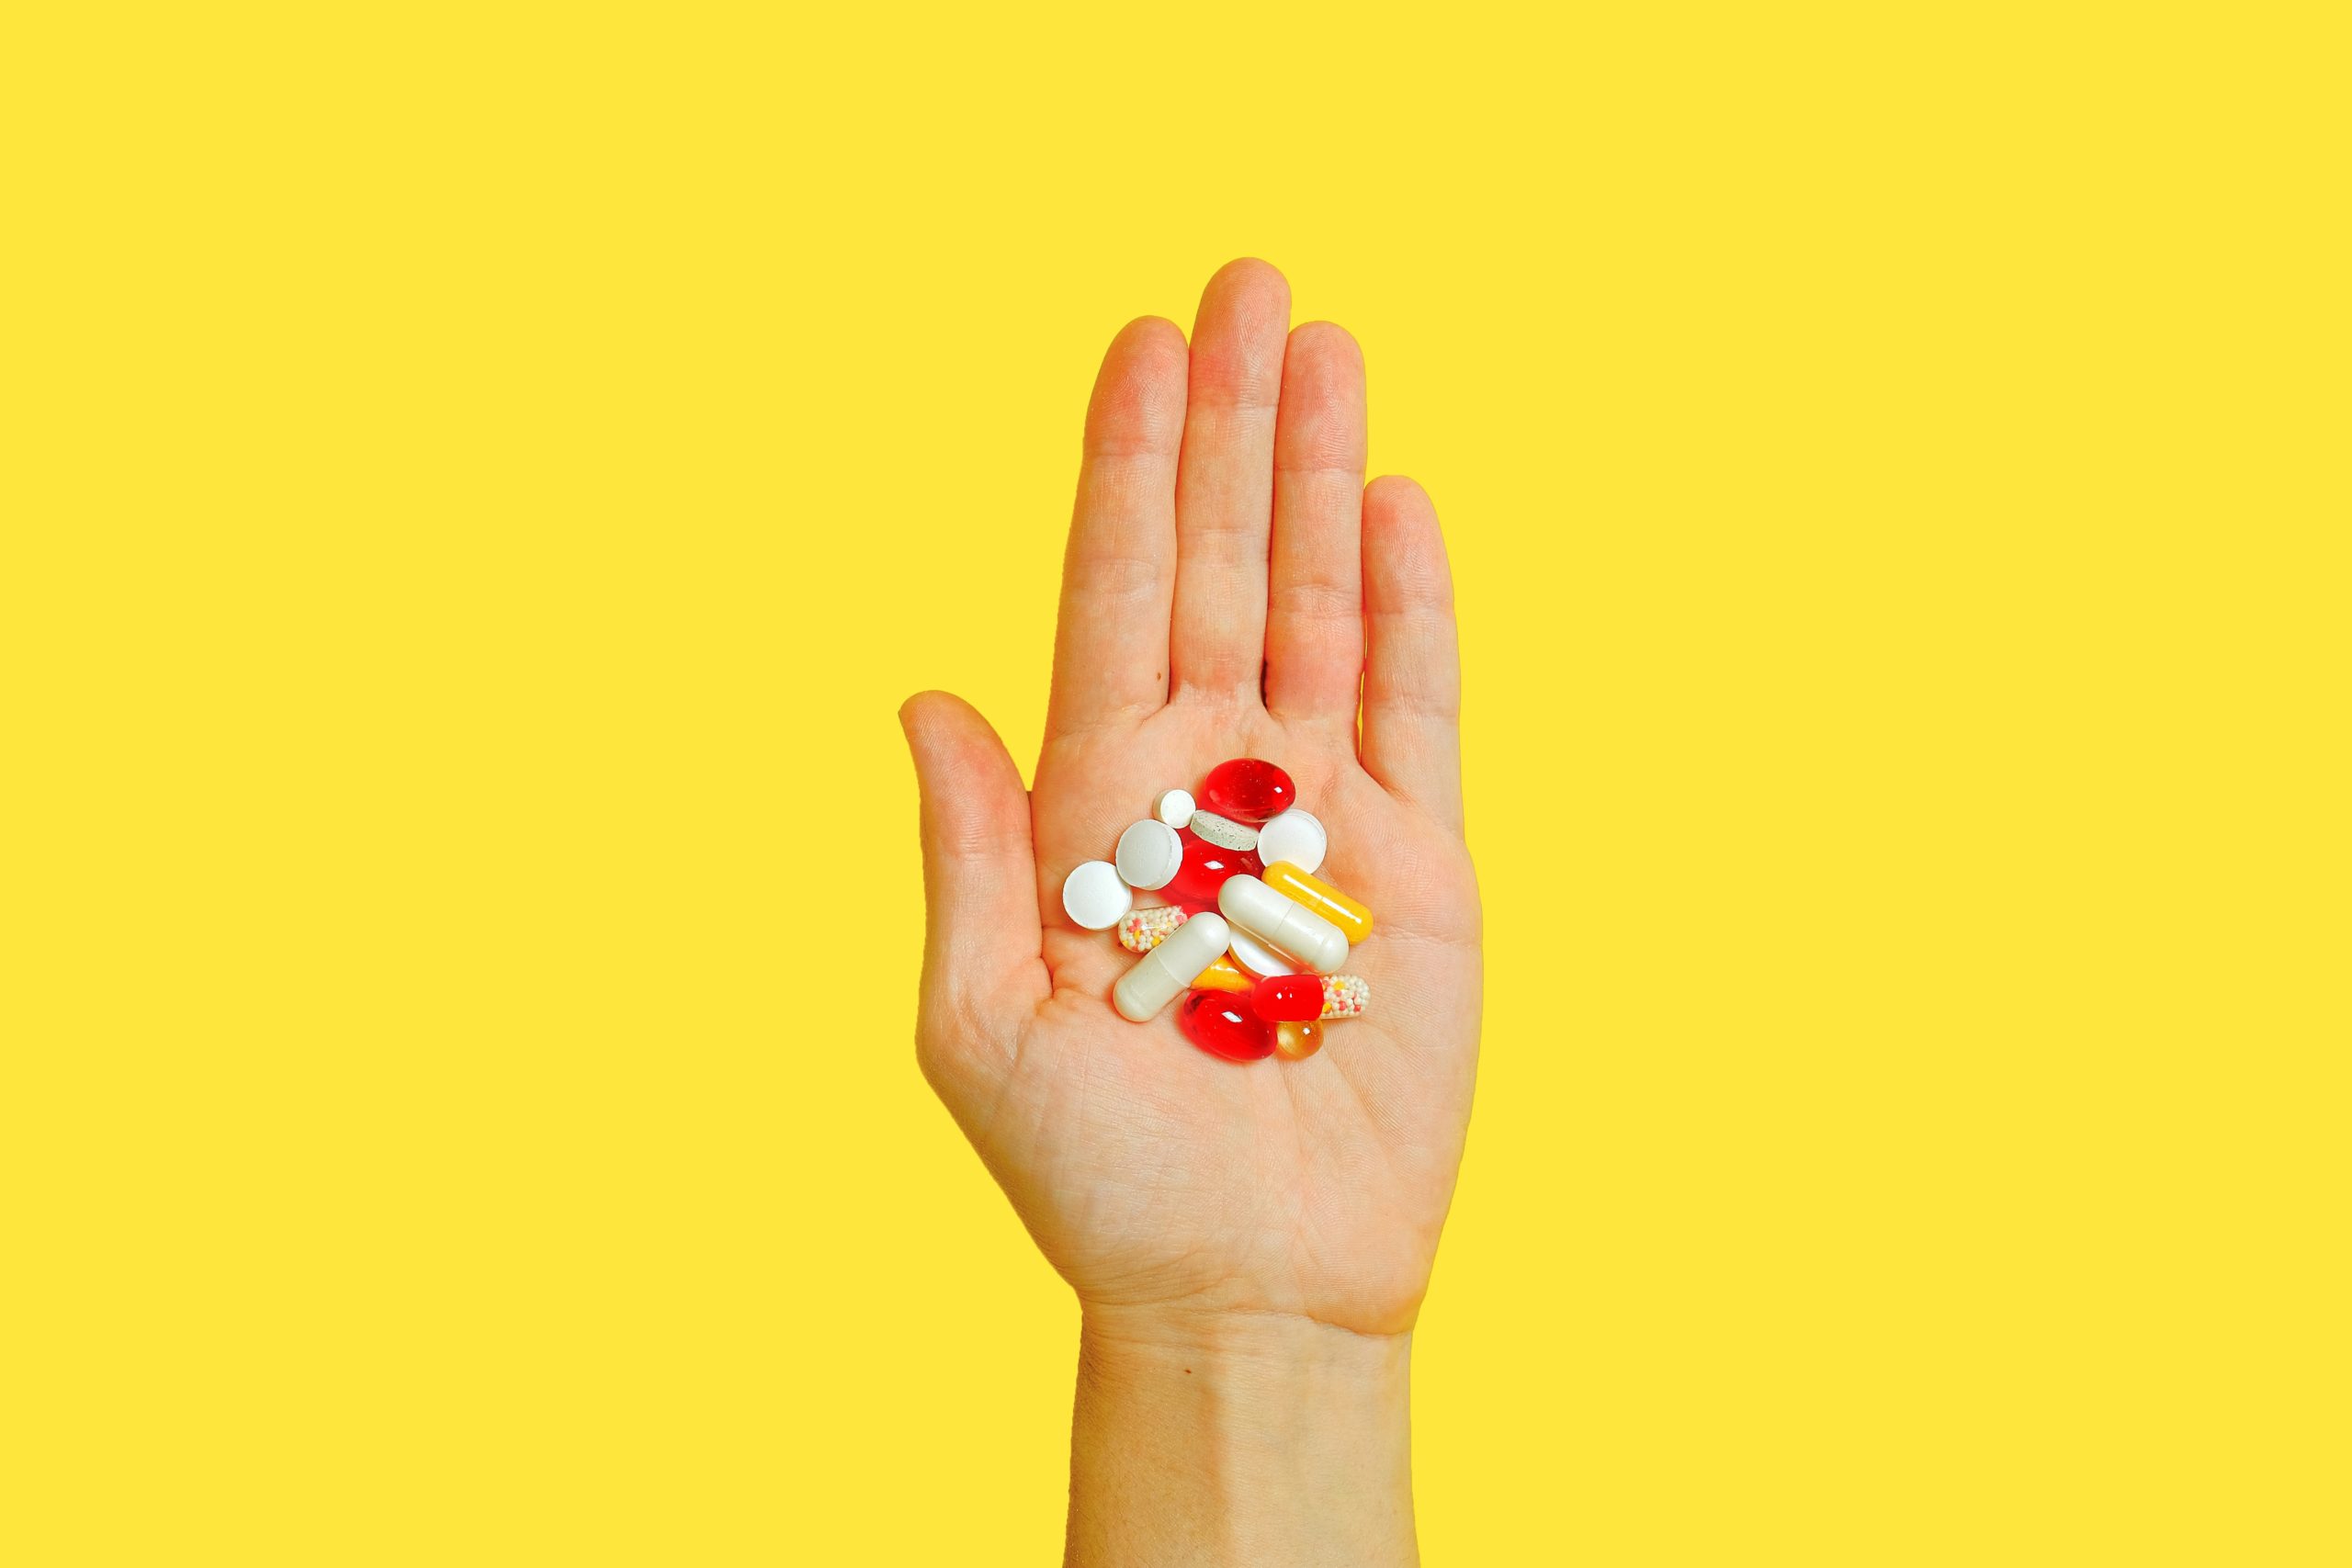 Hand holding pills over a yellow backdrop